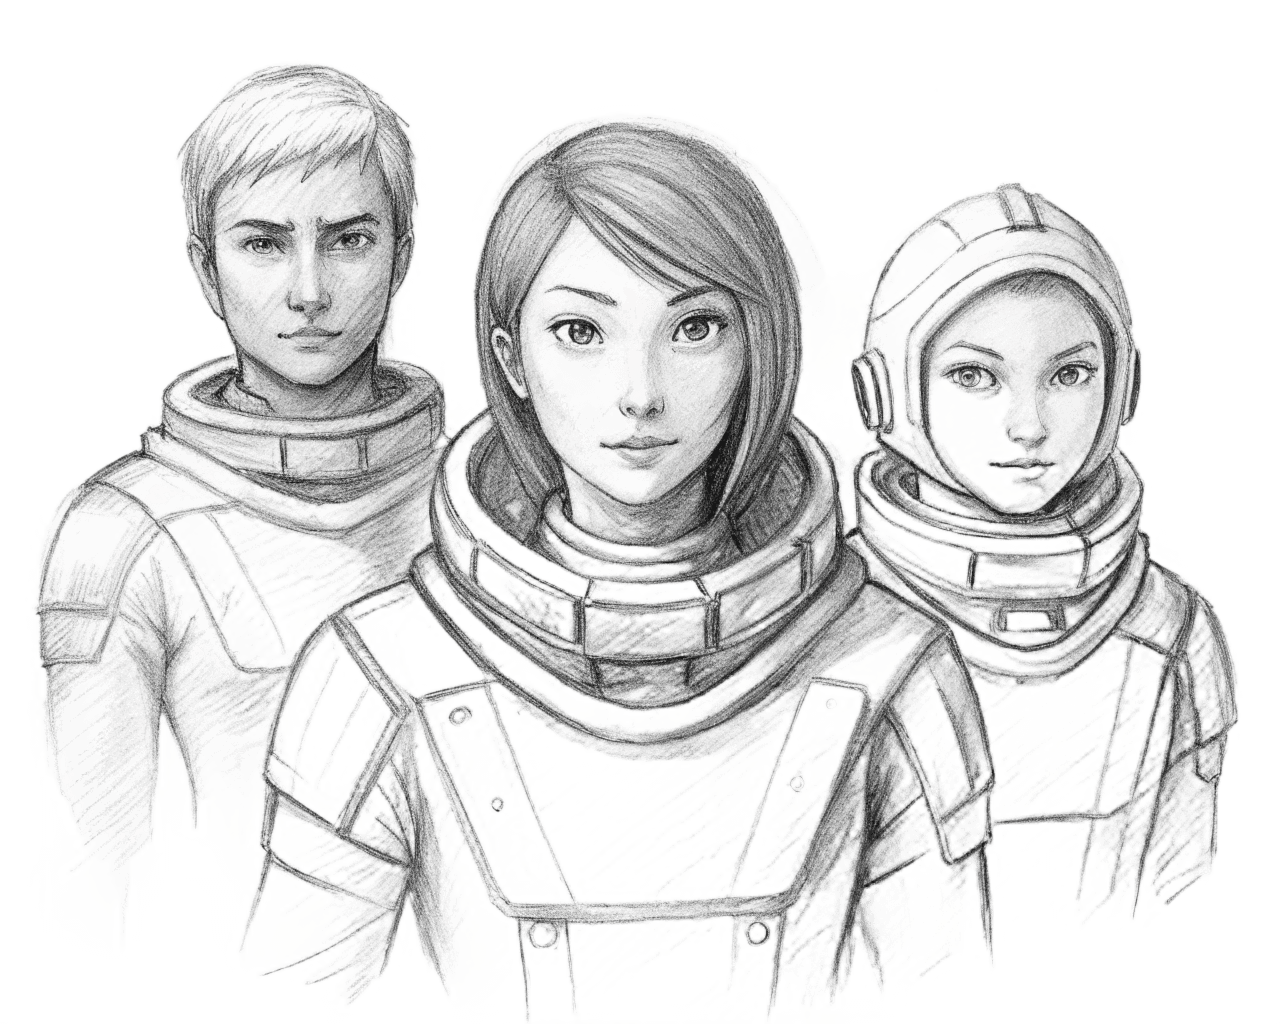 3 friendly astronauts from masseffect video game (1)